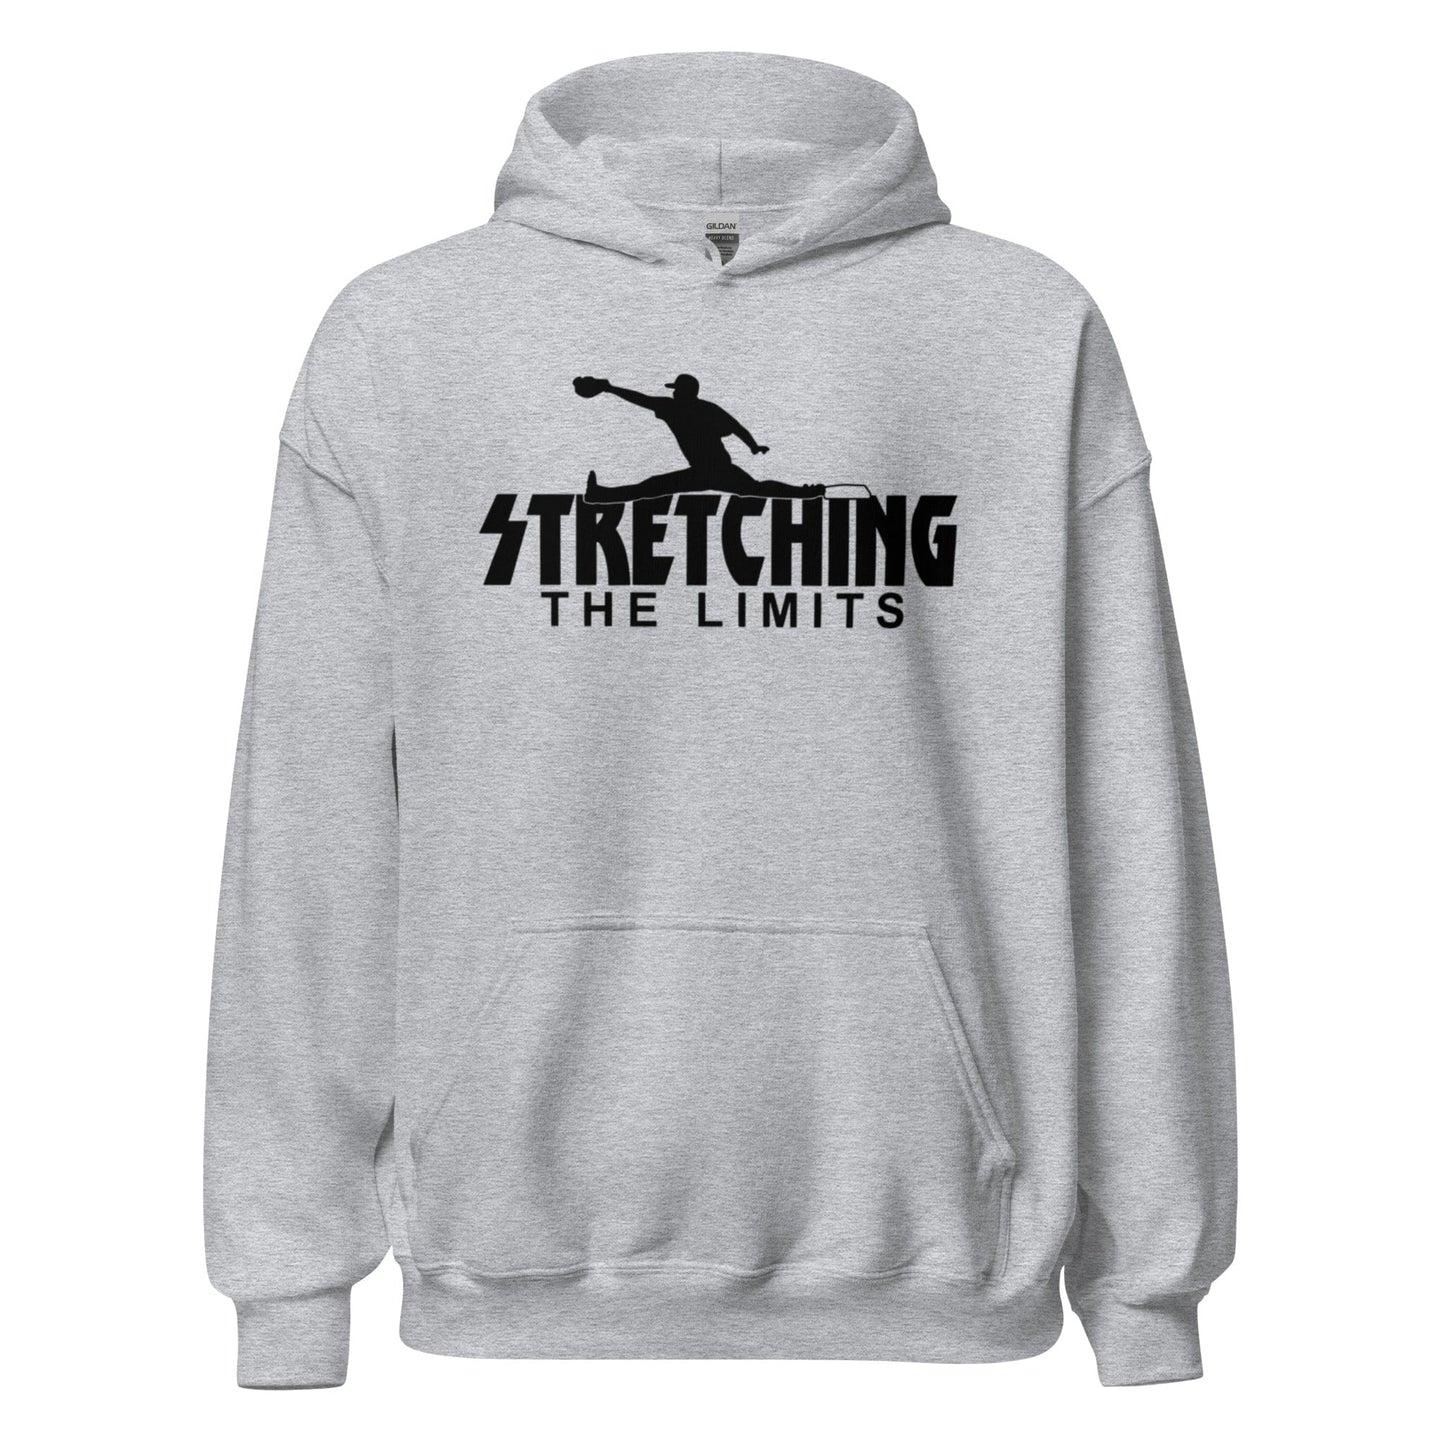 Stretching The Limits - Adult Hoodie